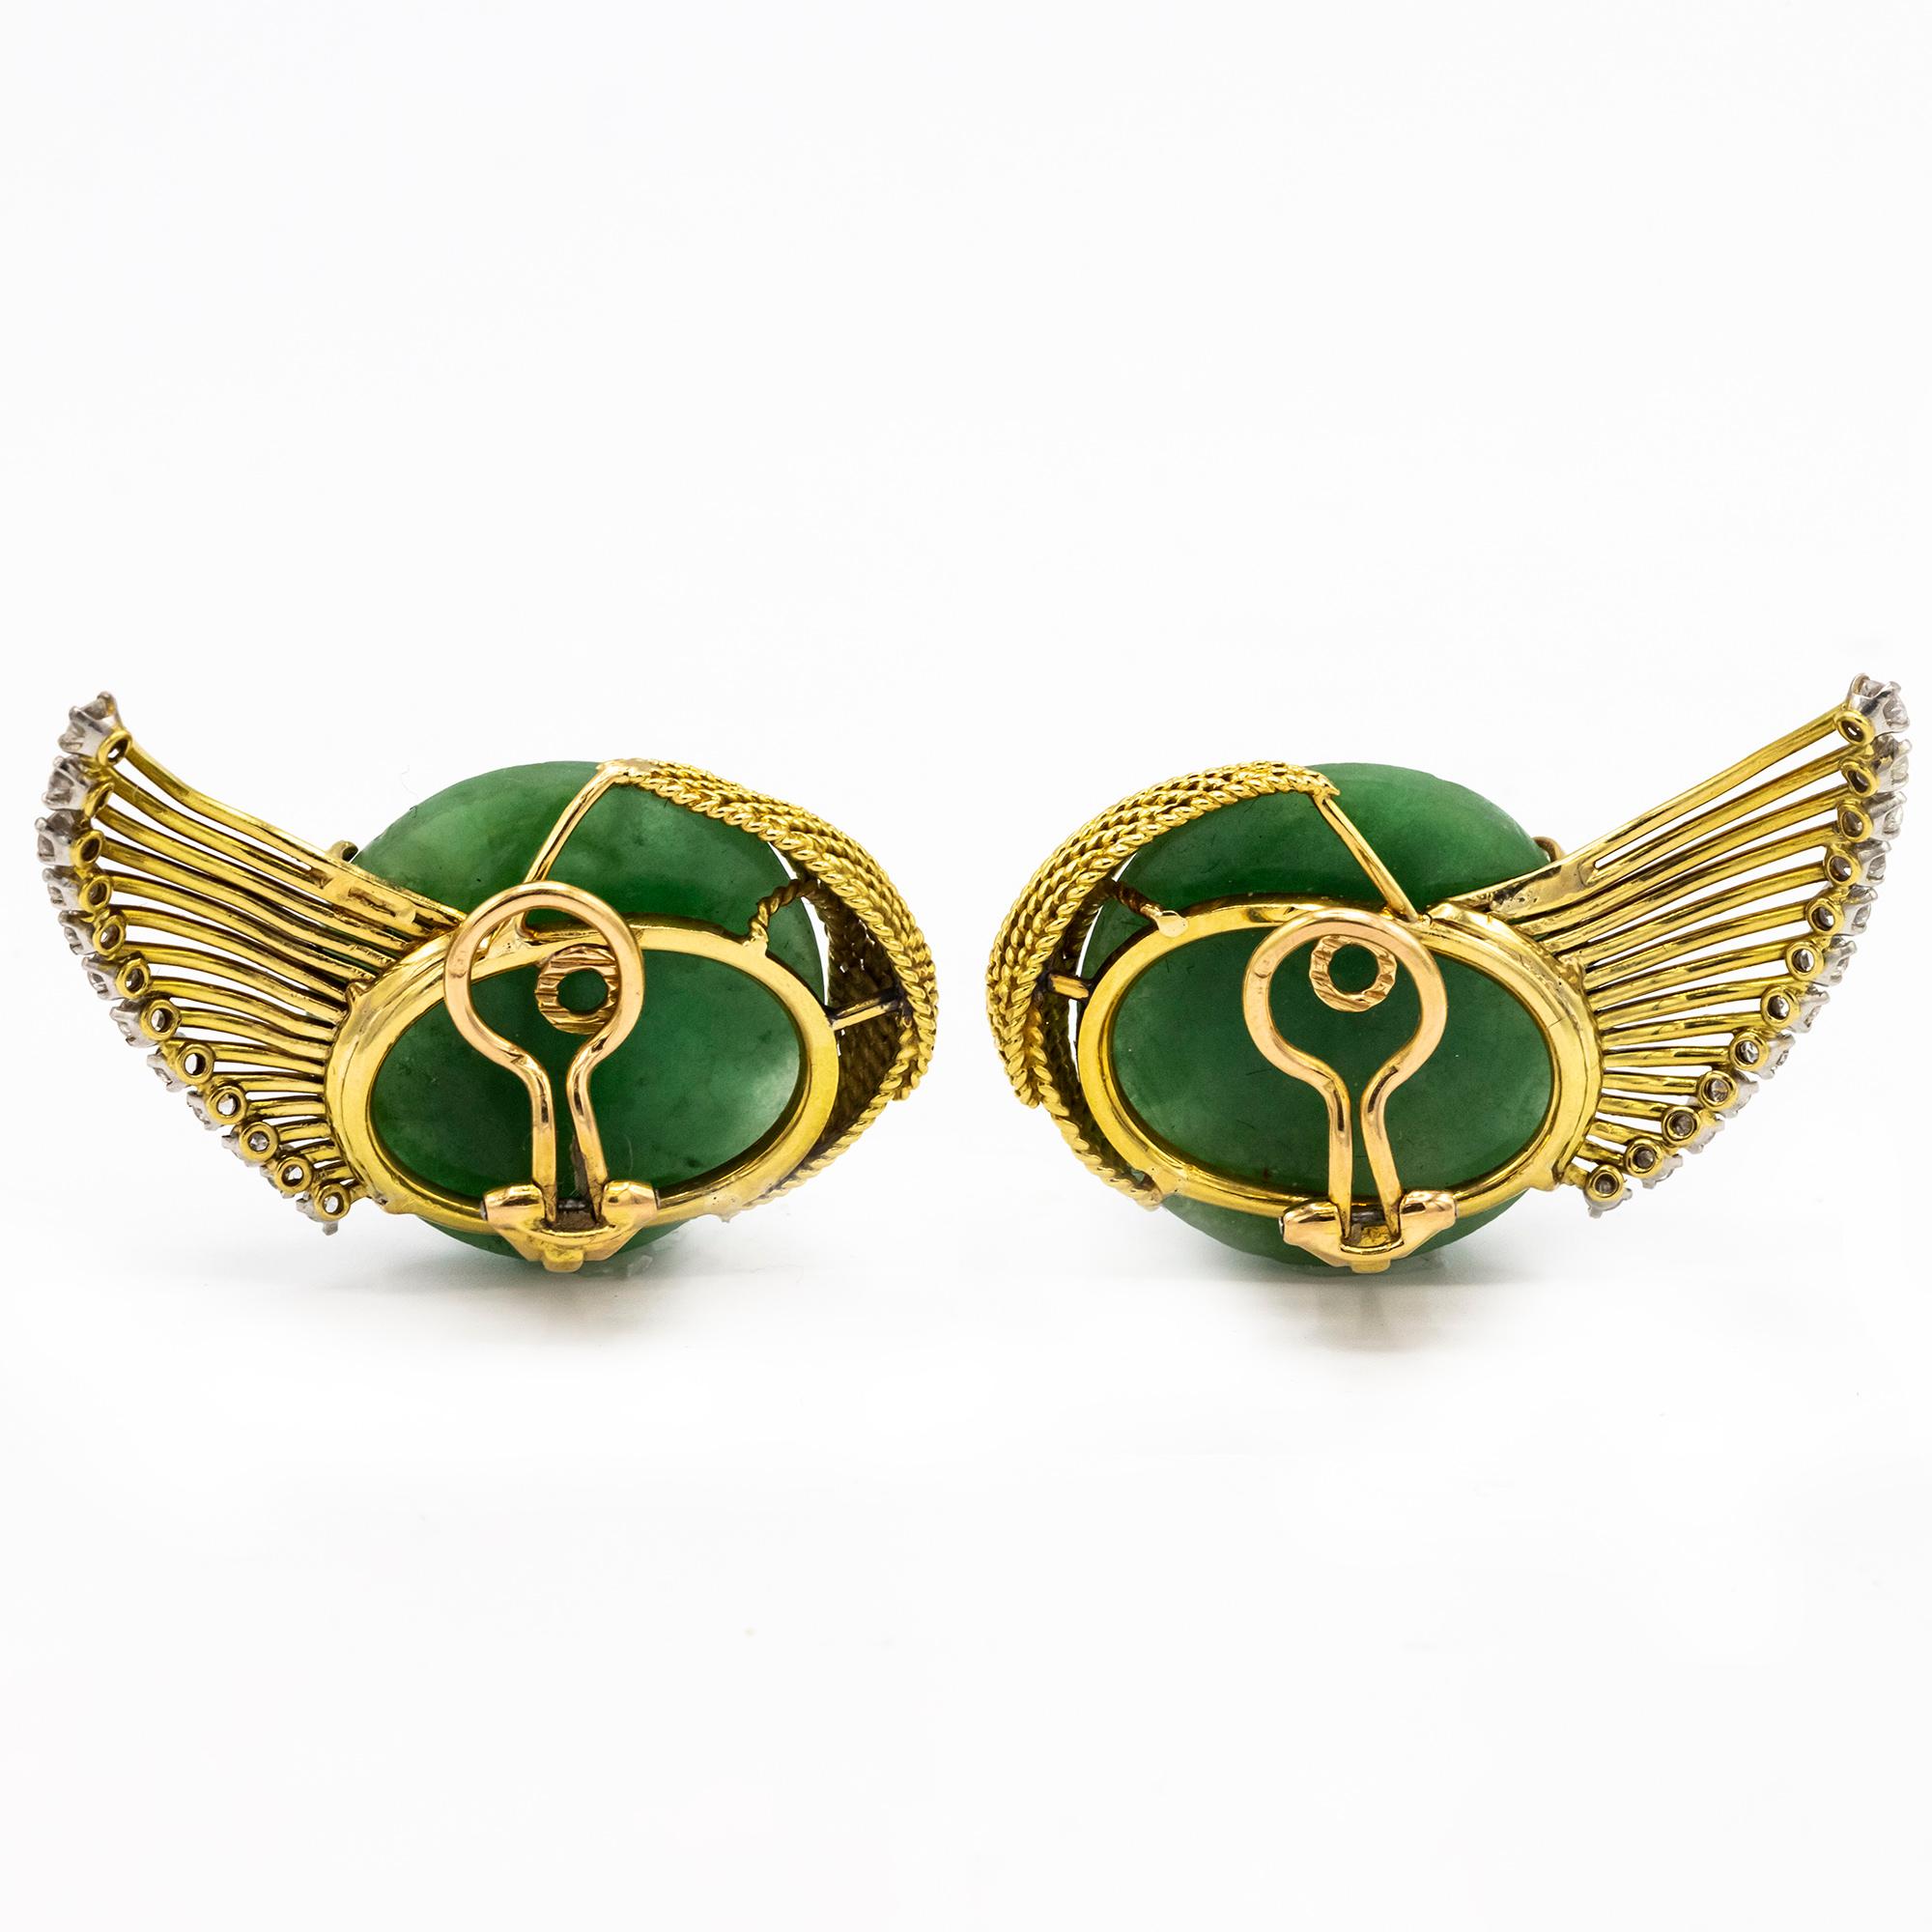 Vintage Handcarved Jade Faces Ear clips with Gold Diamond-Accented Wings.
2 carved jade faces ap. 23.0 & 22.3 mm., 24 round diamonds ap. .85 ct., clip-backs with French import marks, c. 1945-1950, ap. 16 dwts. gross.
Jade: mossy green, translucent,